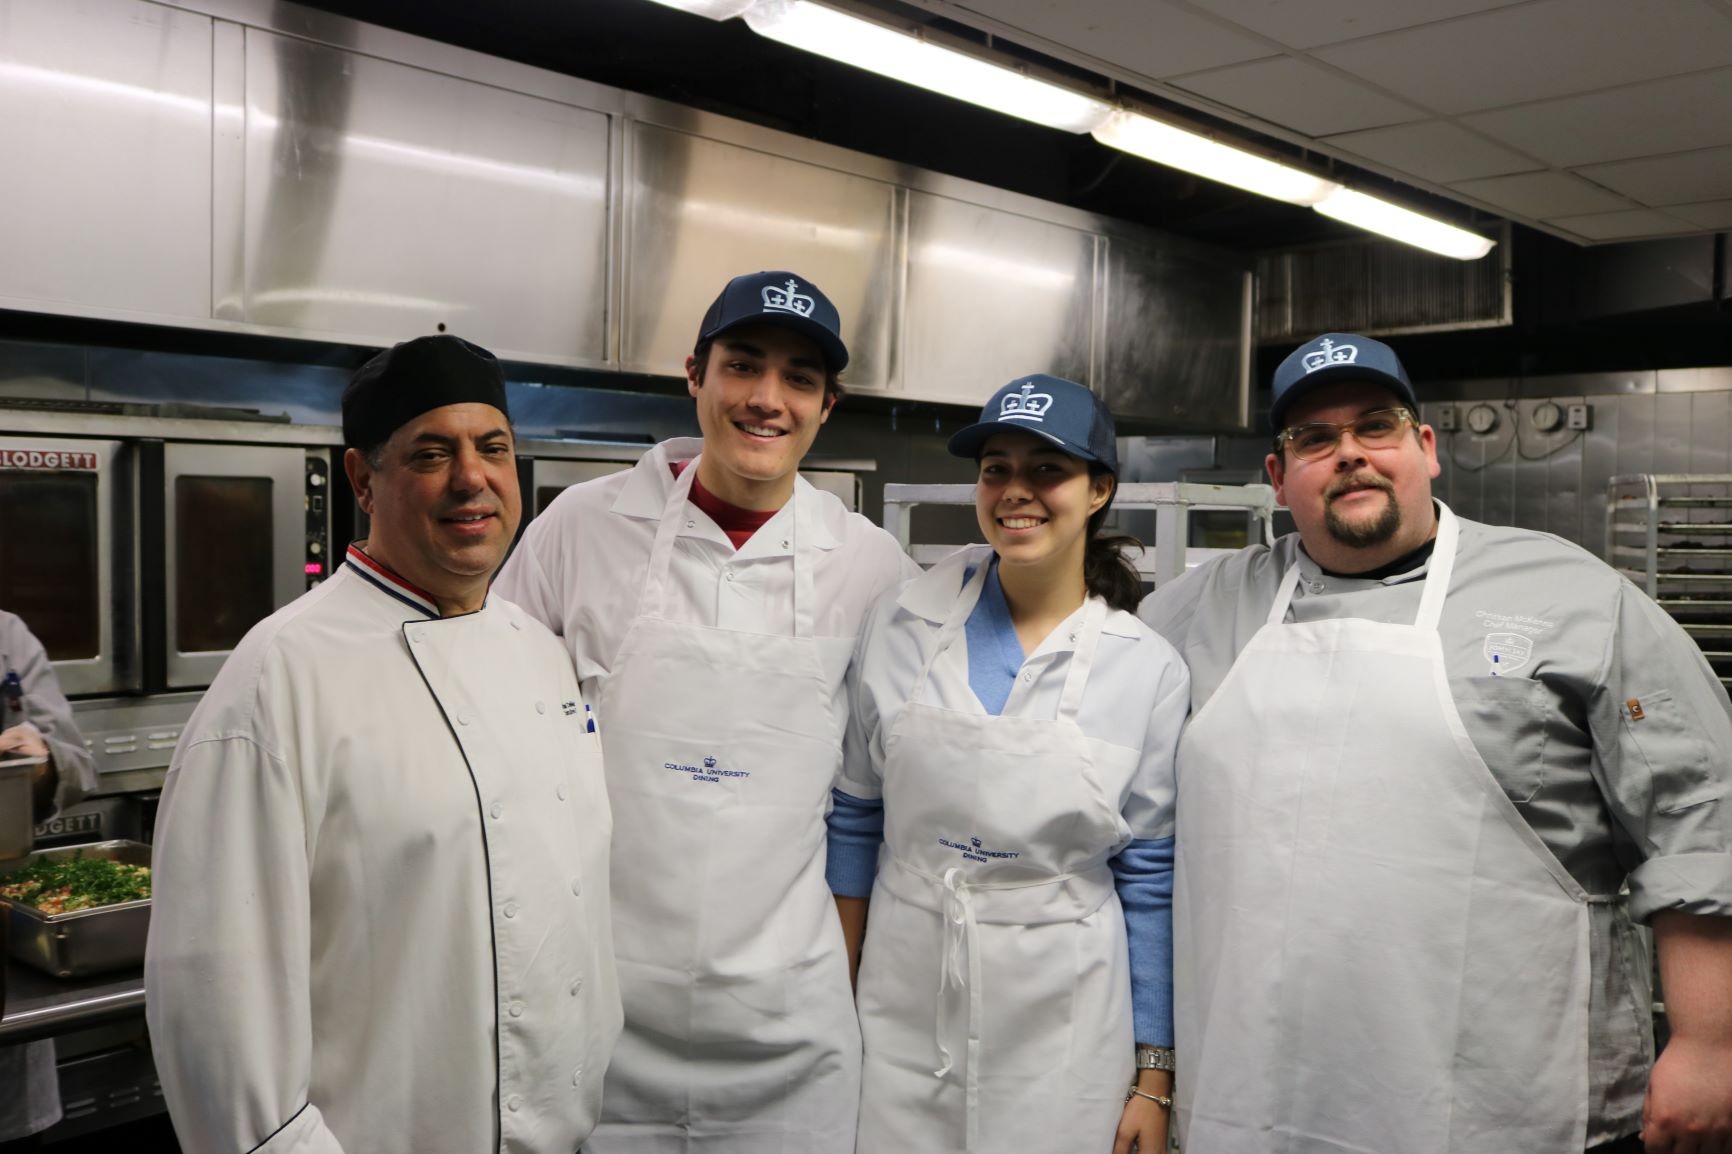 Teodora with John, Chef Mike, and Chef Christian in the John Jay kitchen ready to prep dinner